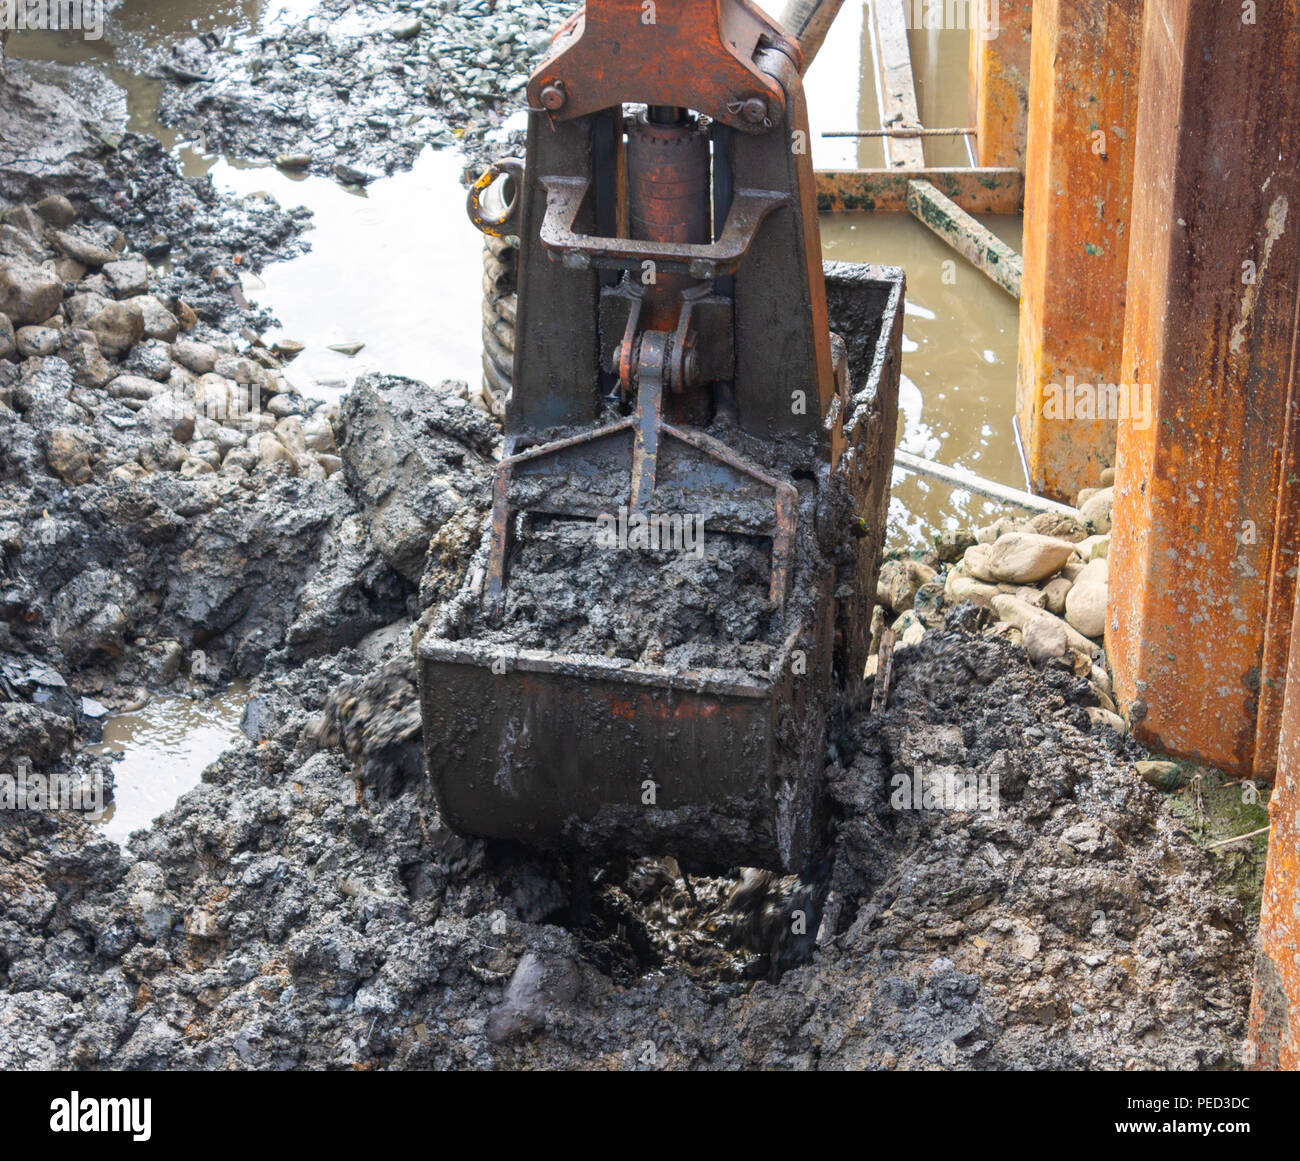 mechanical digger with bucket excavating a trench on a building site. Stock Photo